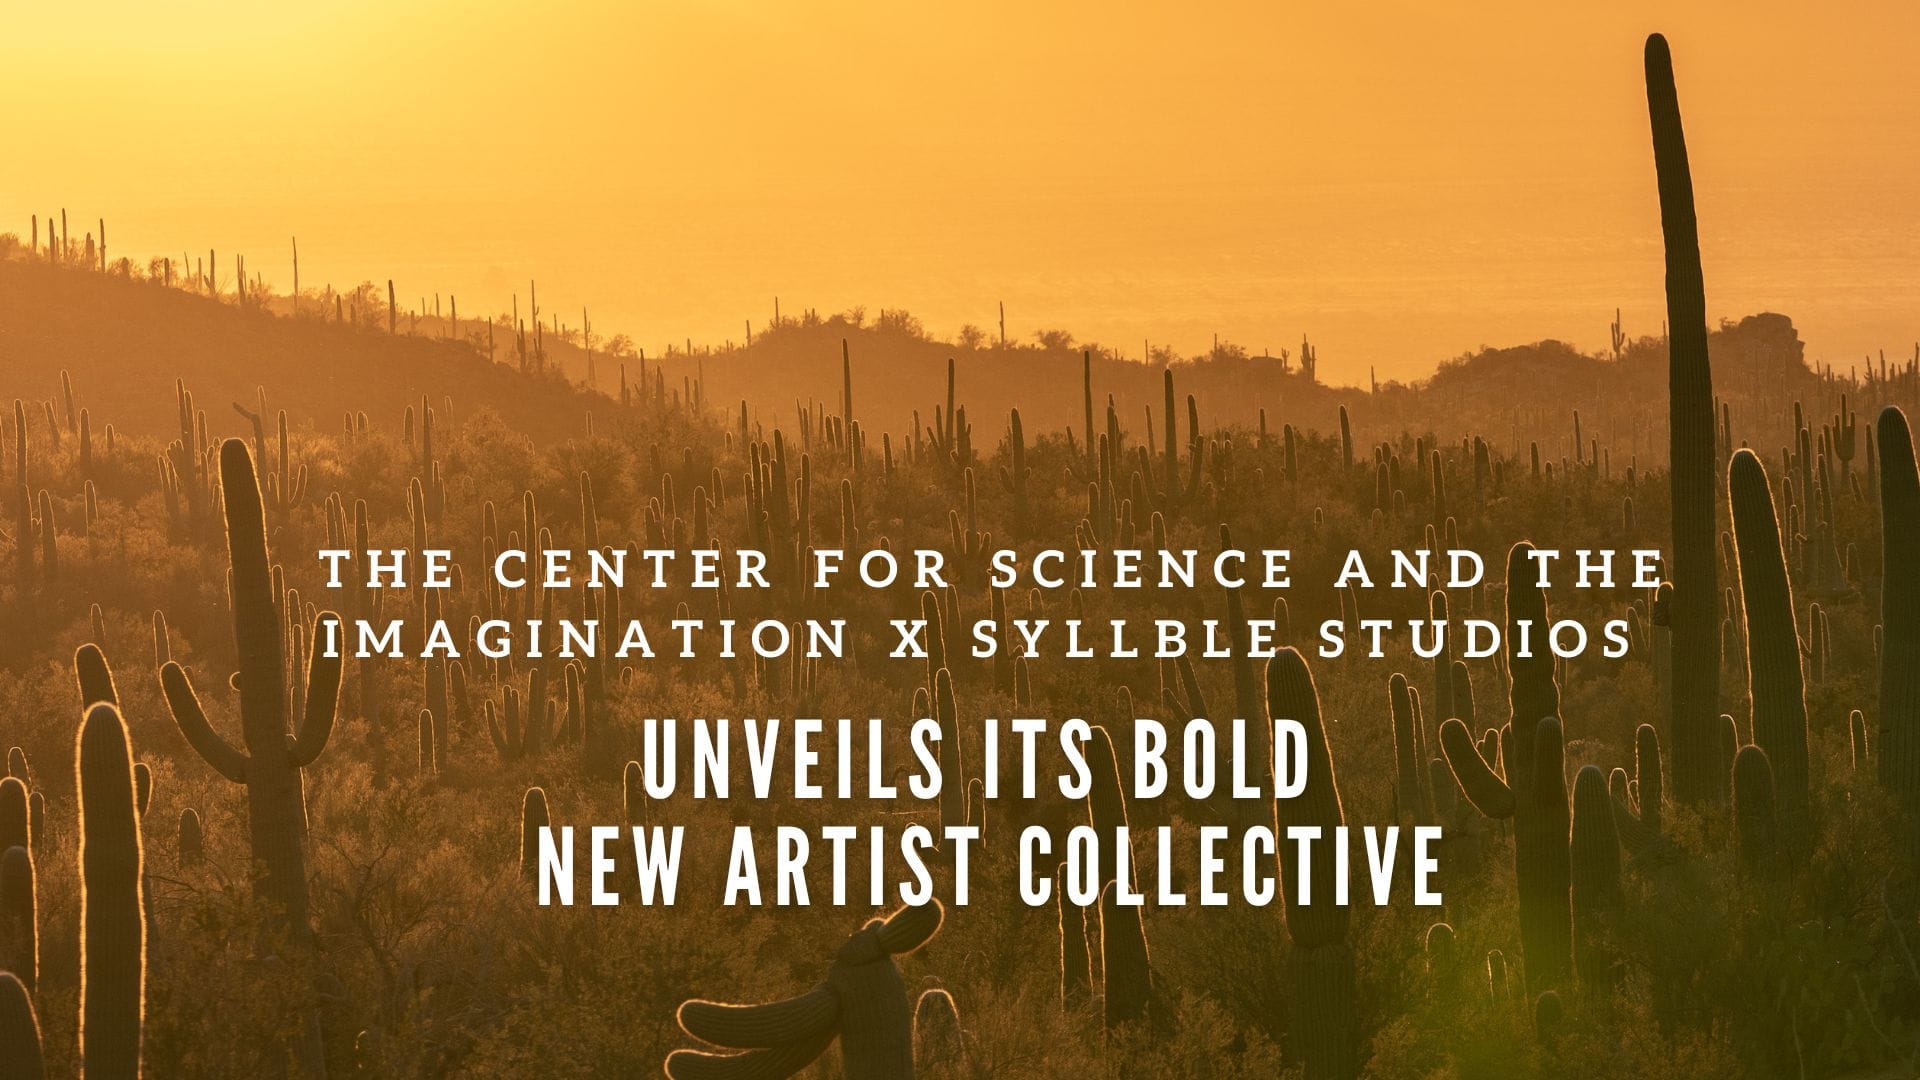 Revolutionizing the Arts: A New Collective Emerges at Arizona State University